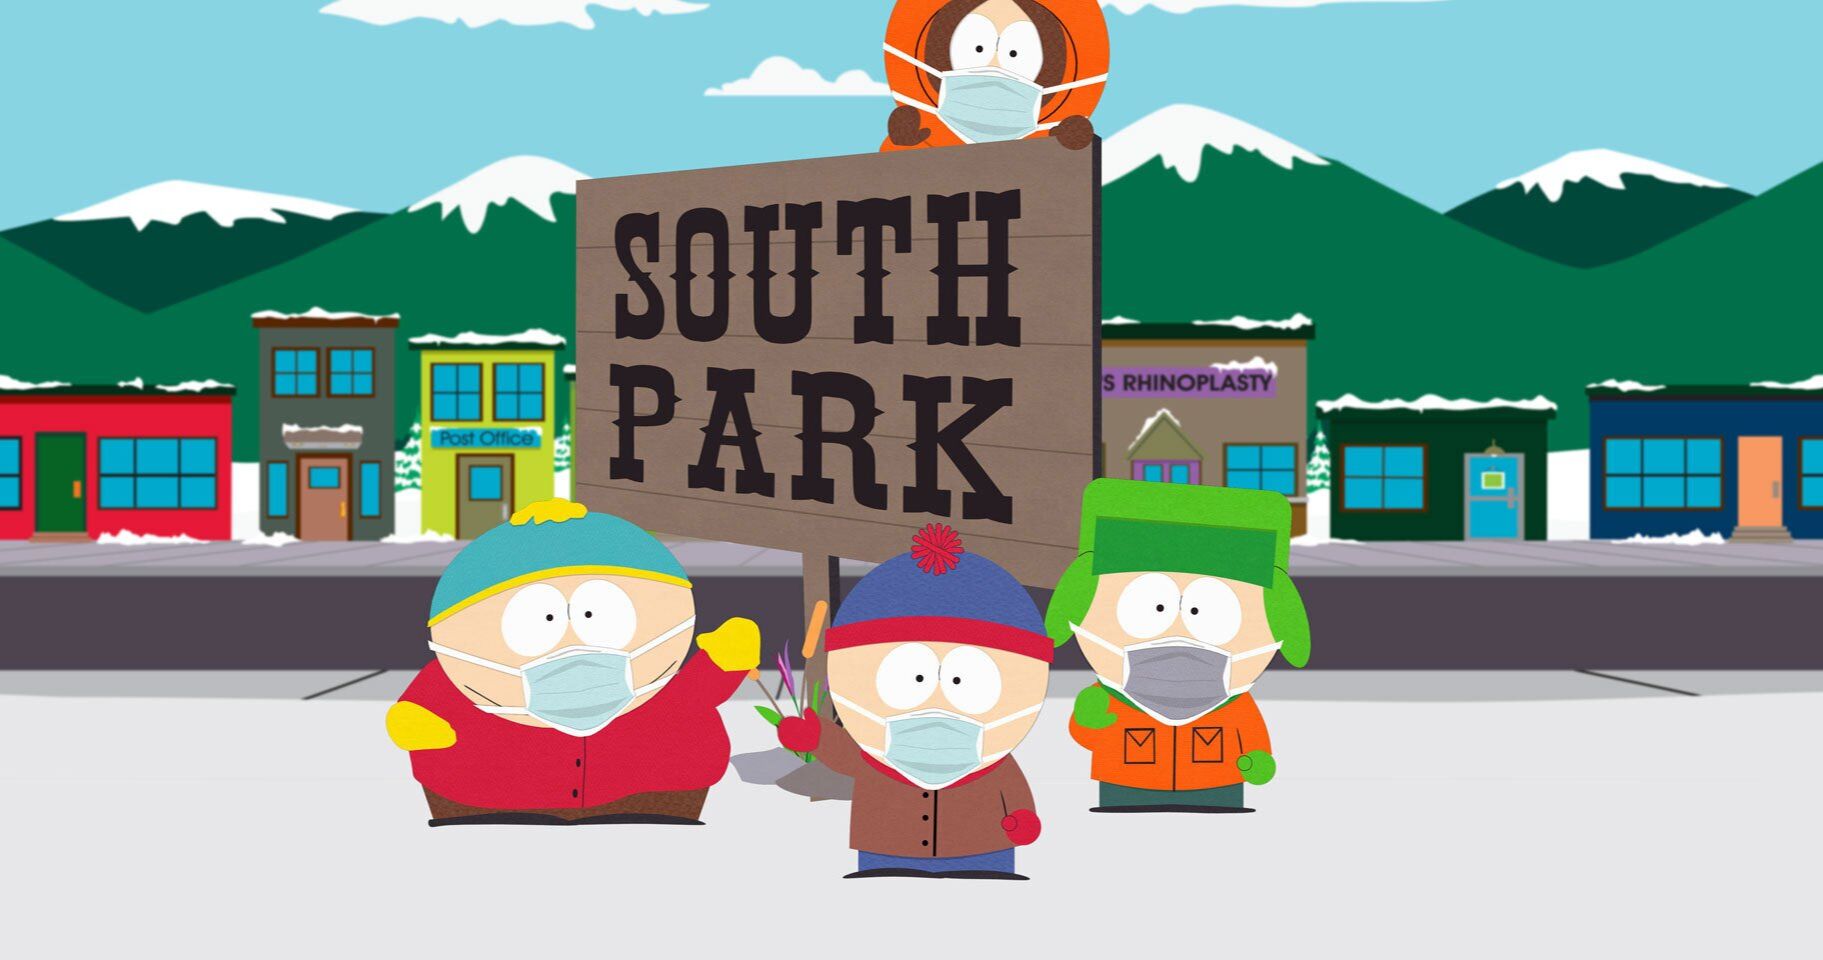 Paramount+ Confirms Two New South Park Specials in 2022